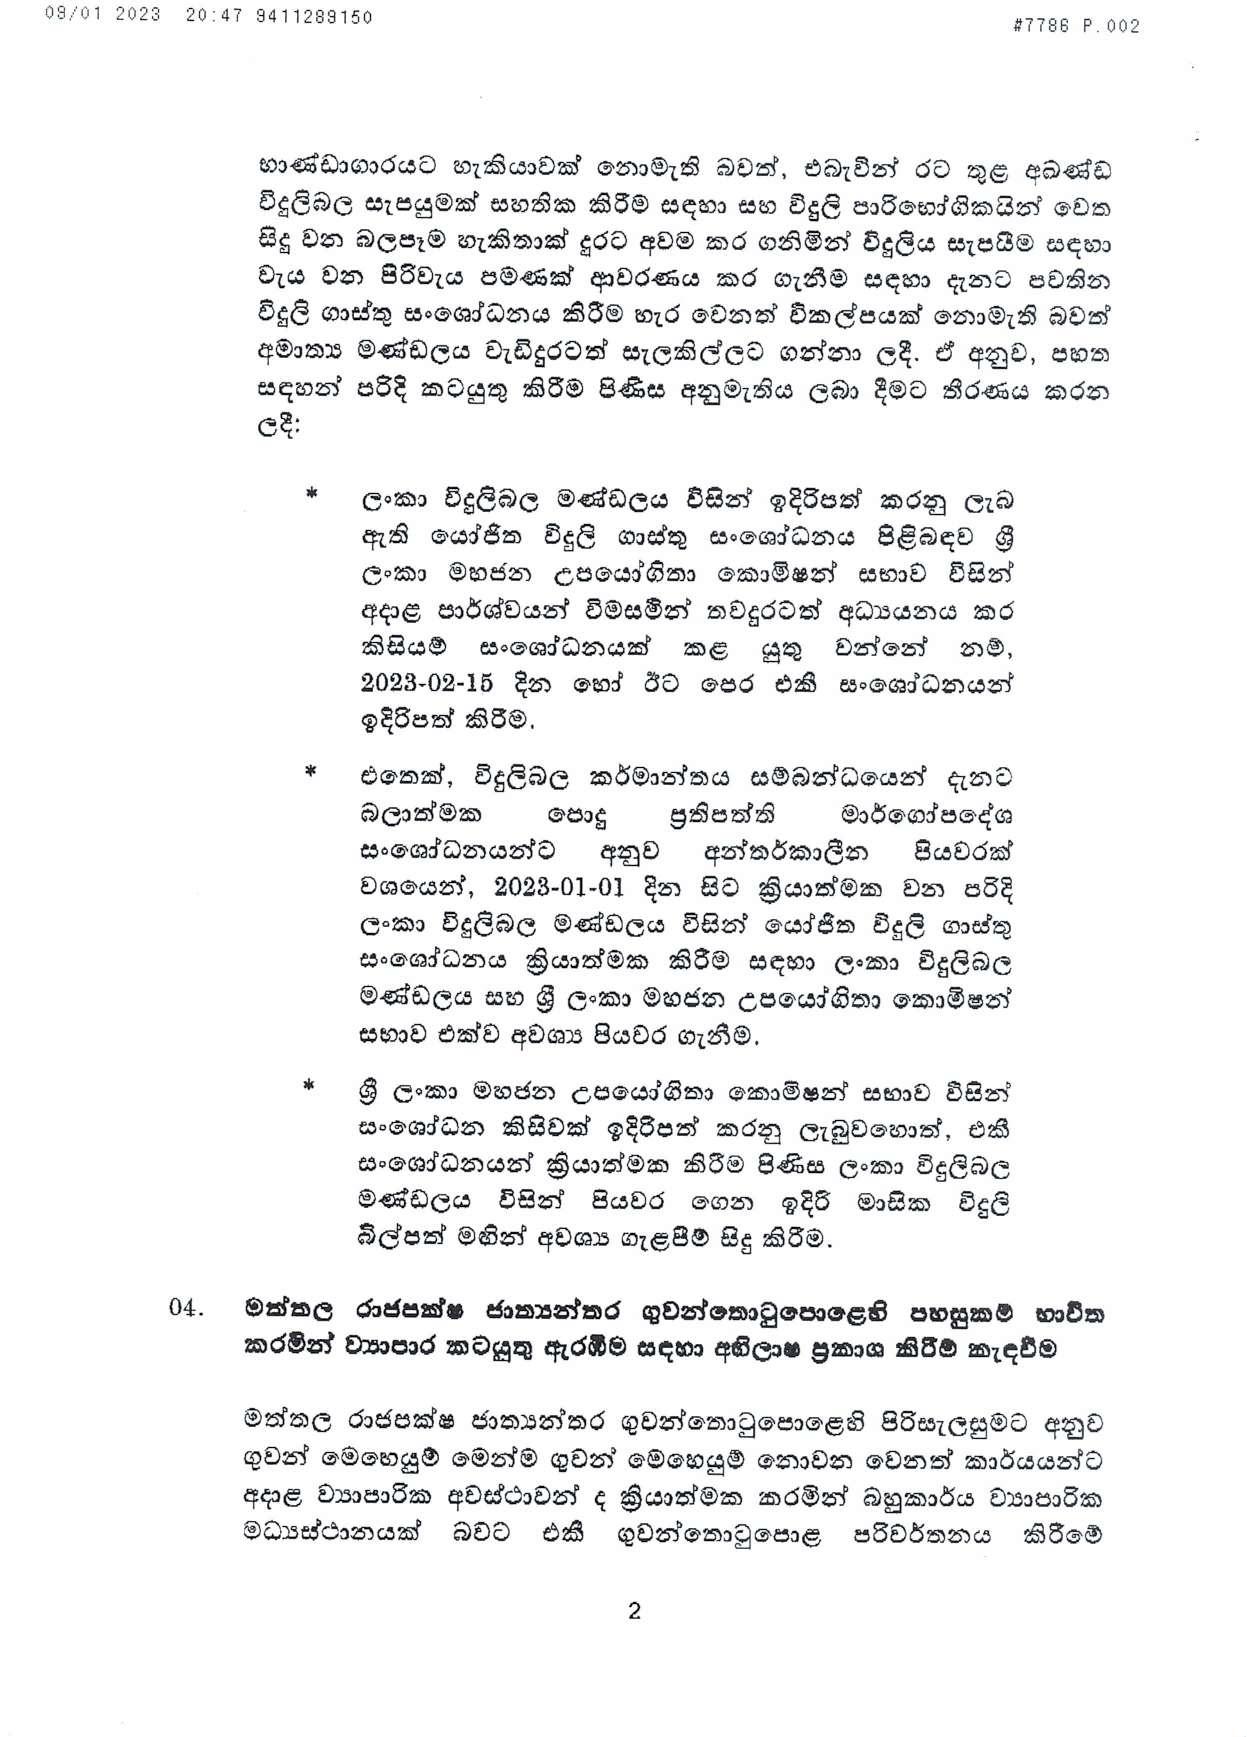 Cabinet Decision on 09.01.2023 page 002